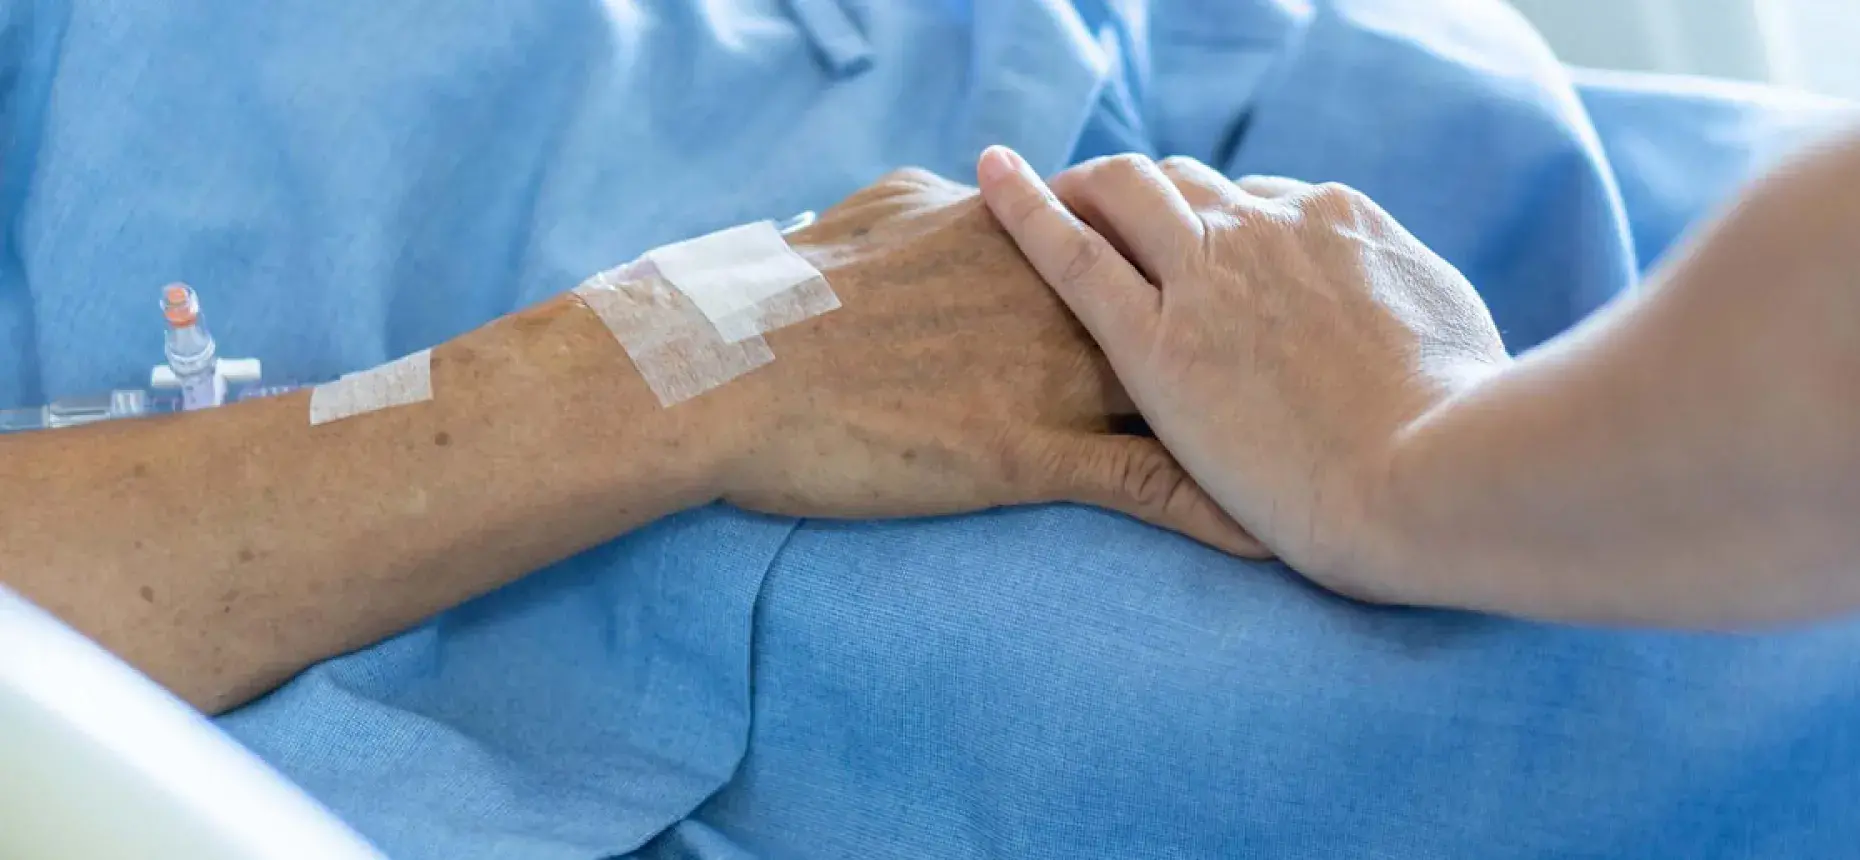 person holding hands with patient in hospital bed